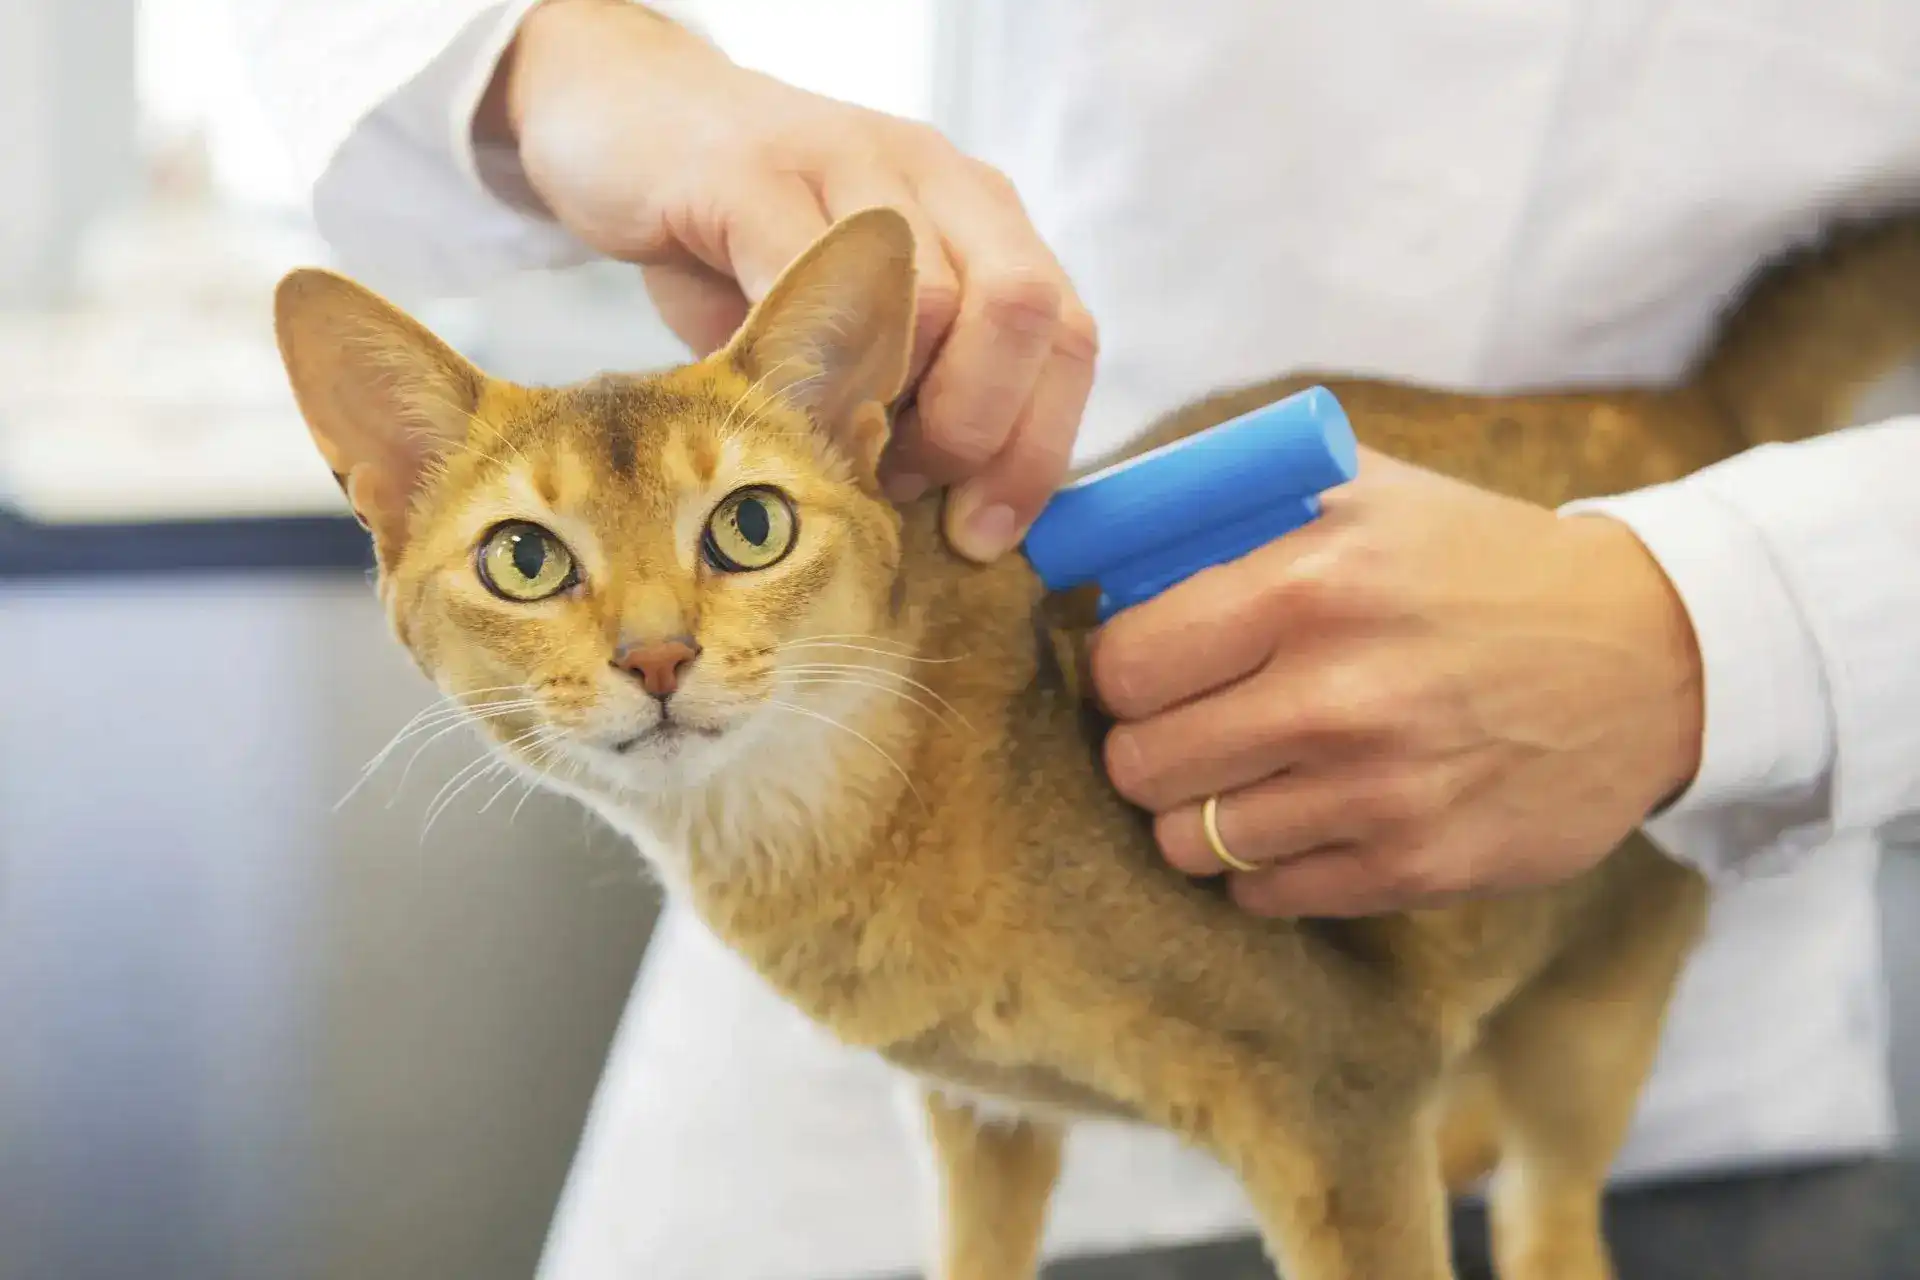 Cat getting a microchip implanted